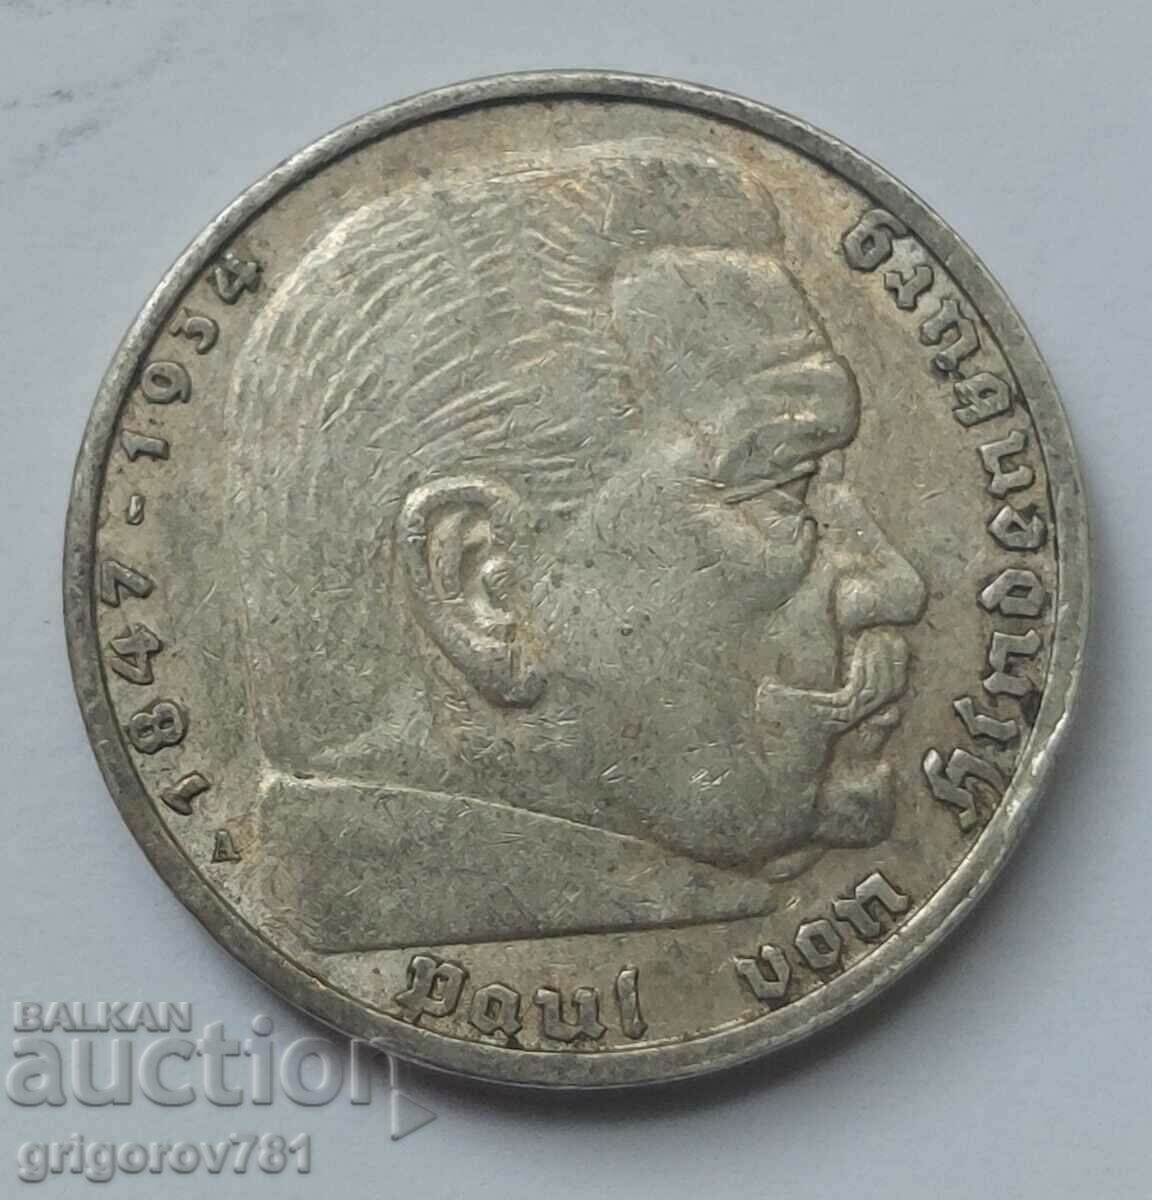 5 Mark Silver Germany 1935 A III Reich Silver Coin #61